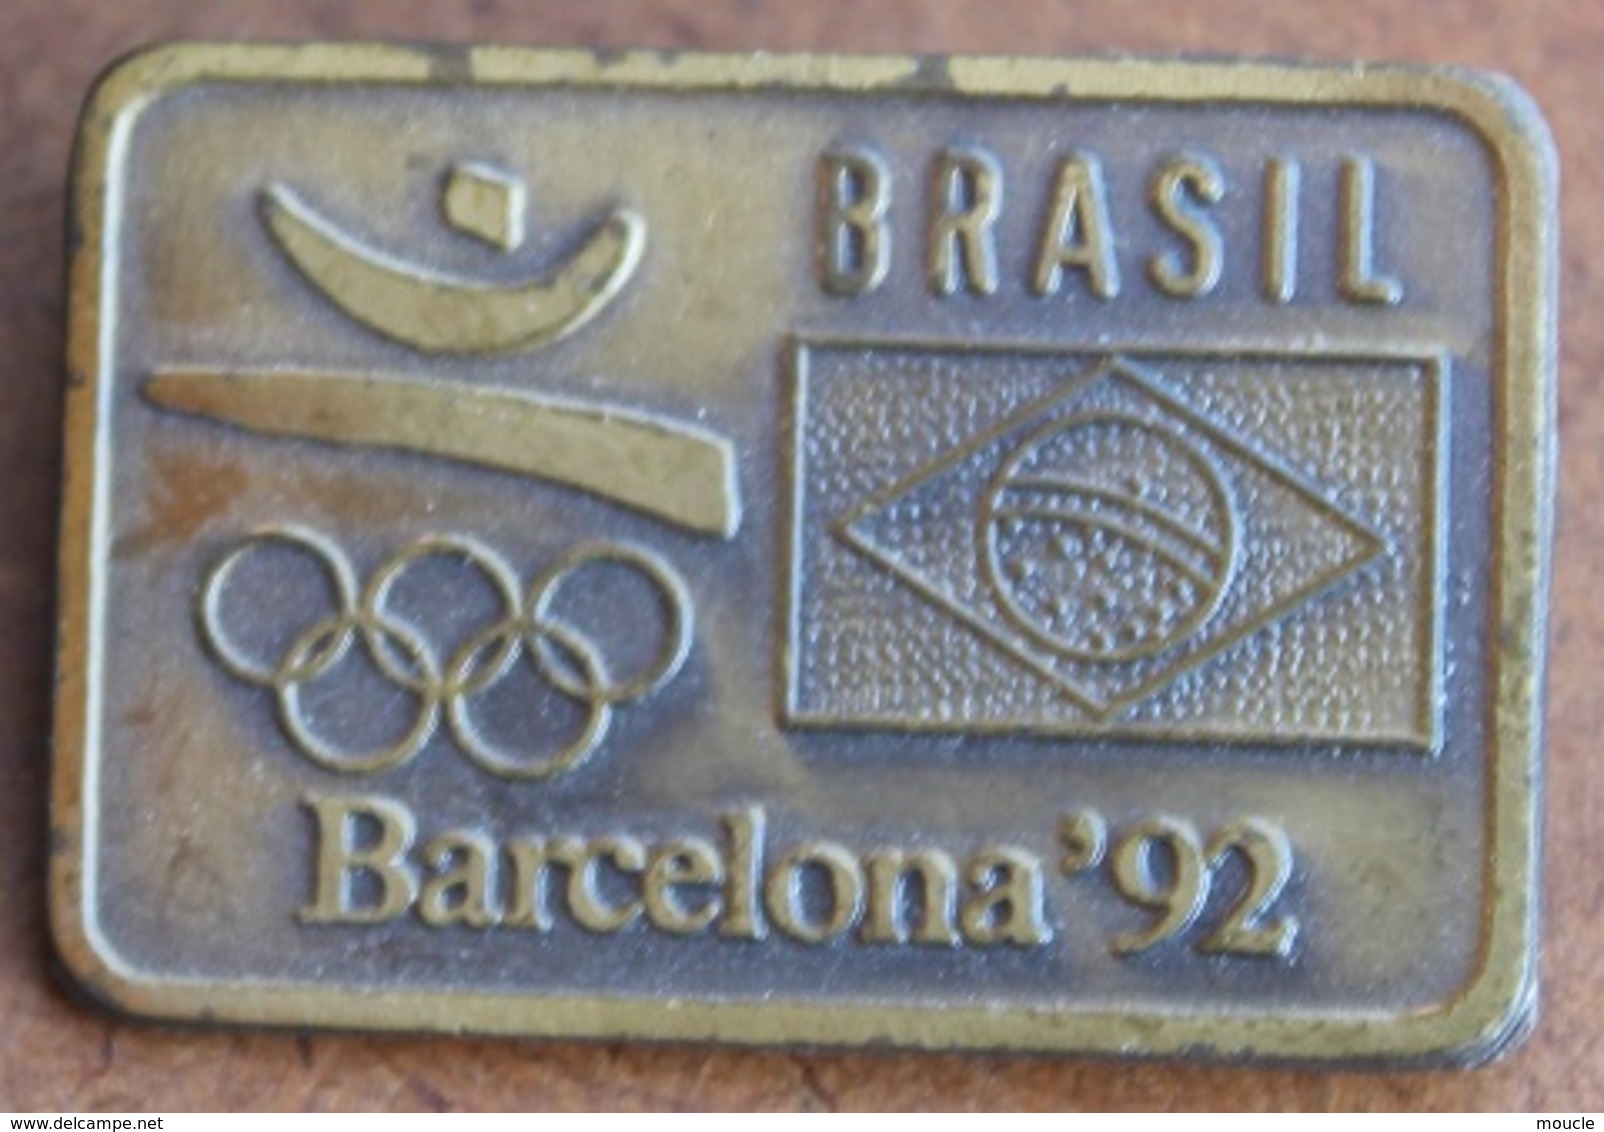 ATTENTION C'EST UNE BROCHE - SPINDEL - BROOCH -  JEUX OLYMPIQUES BARCELONA 92 - BRASIL OLYMPIC TEAM - BRESIL - Giochi Olimpici